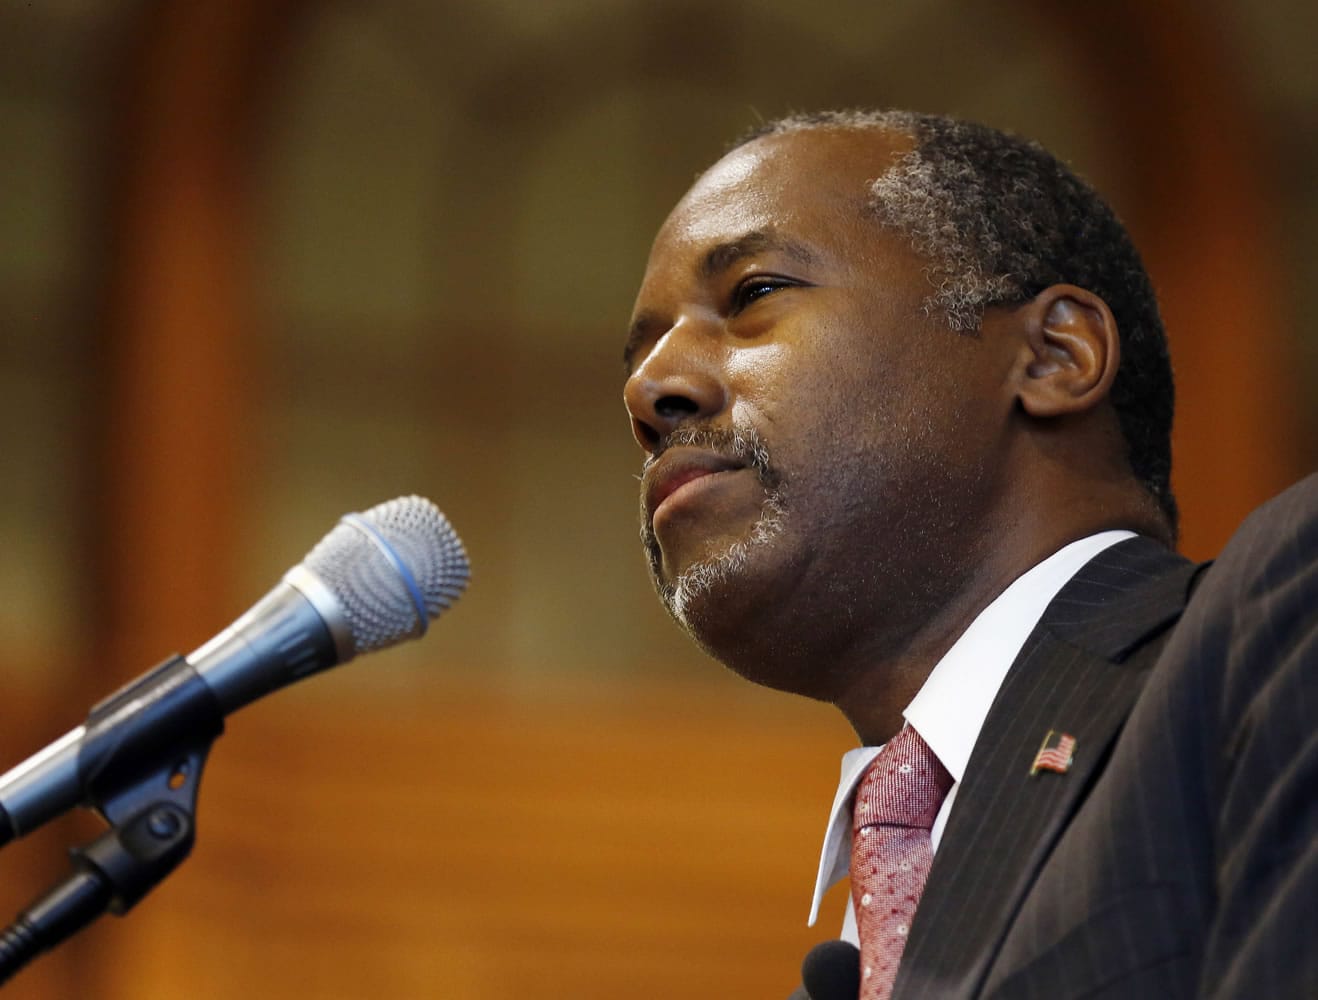 Republican presidential candidate, retired neurosurgeon Ben Carson speaks during a campaign stop at the University of New Hampshire on Wednesday in Durham, N.H.